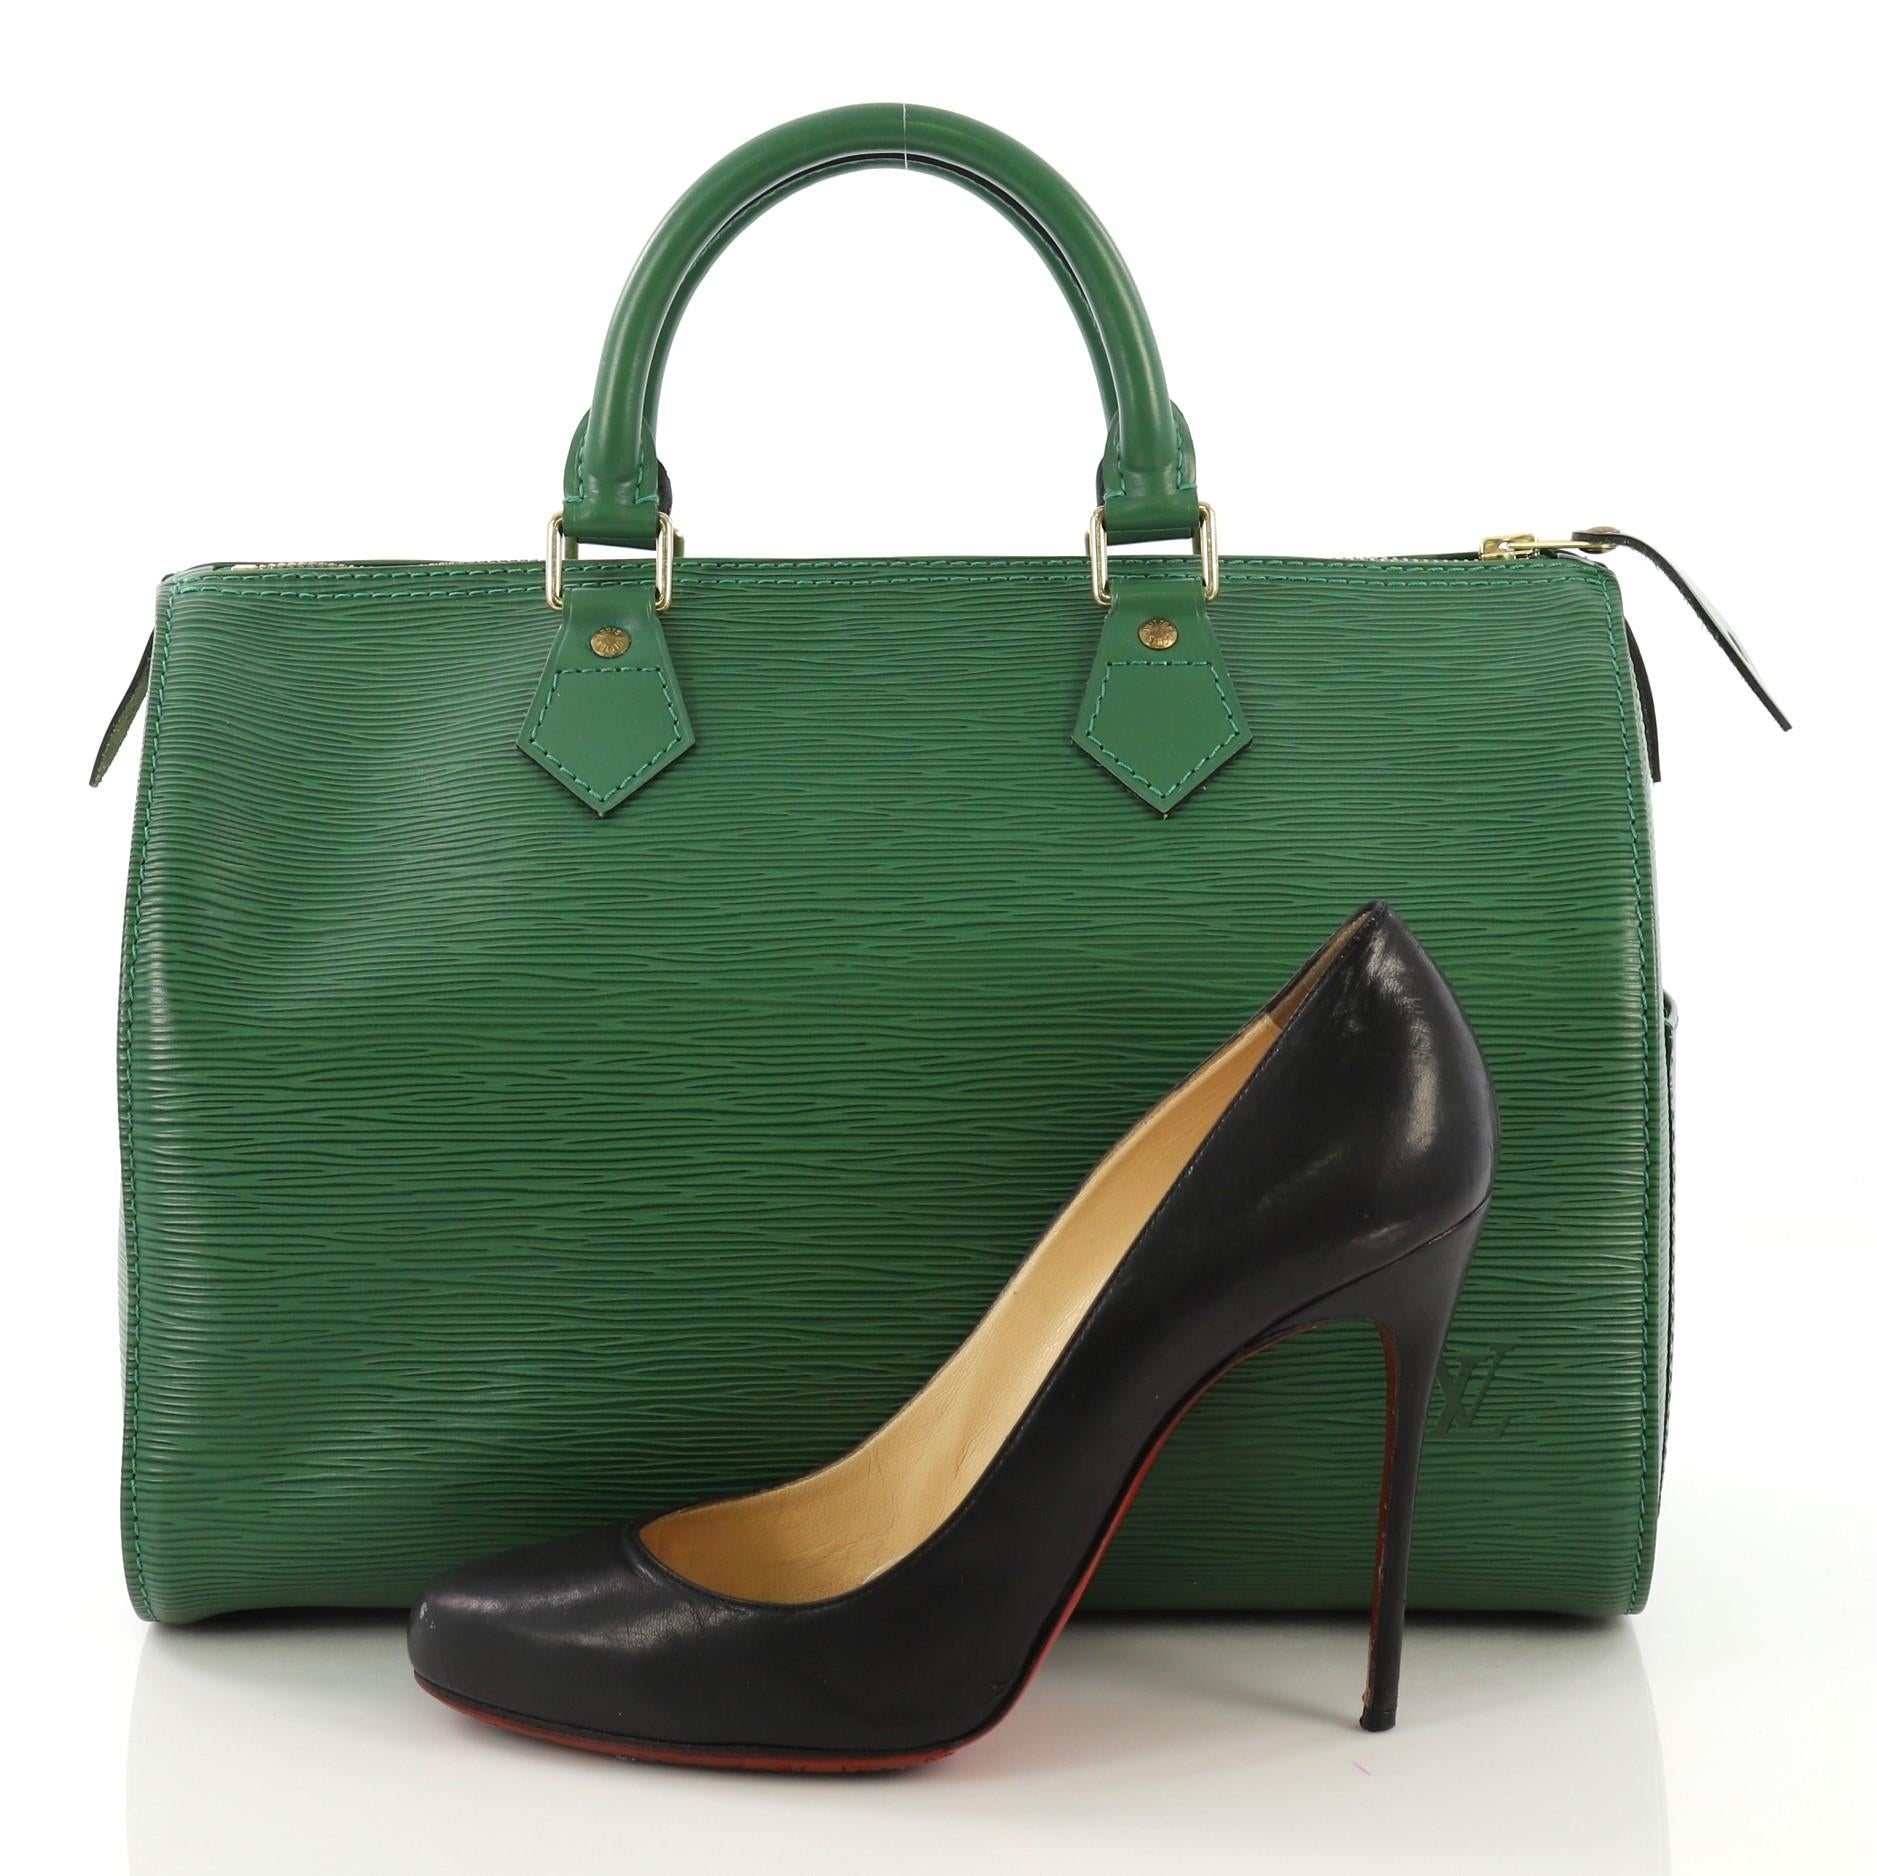 This Louis Vuitton Speedy Handbag Epi Leather 30, crafted from green epi leather, features dual rolled leather handles, exterior side pocket, and gold-tone hardware. Its zip closure opens to a green raw leather interior with slip pockets. **Note: